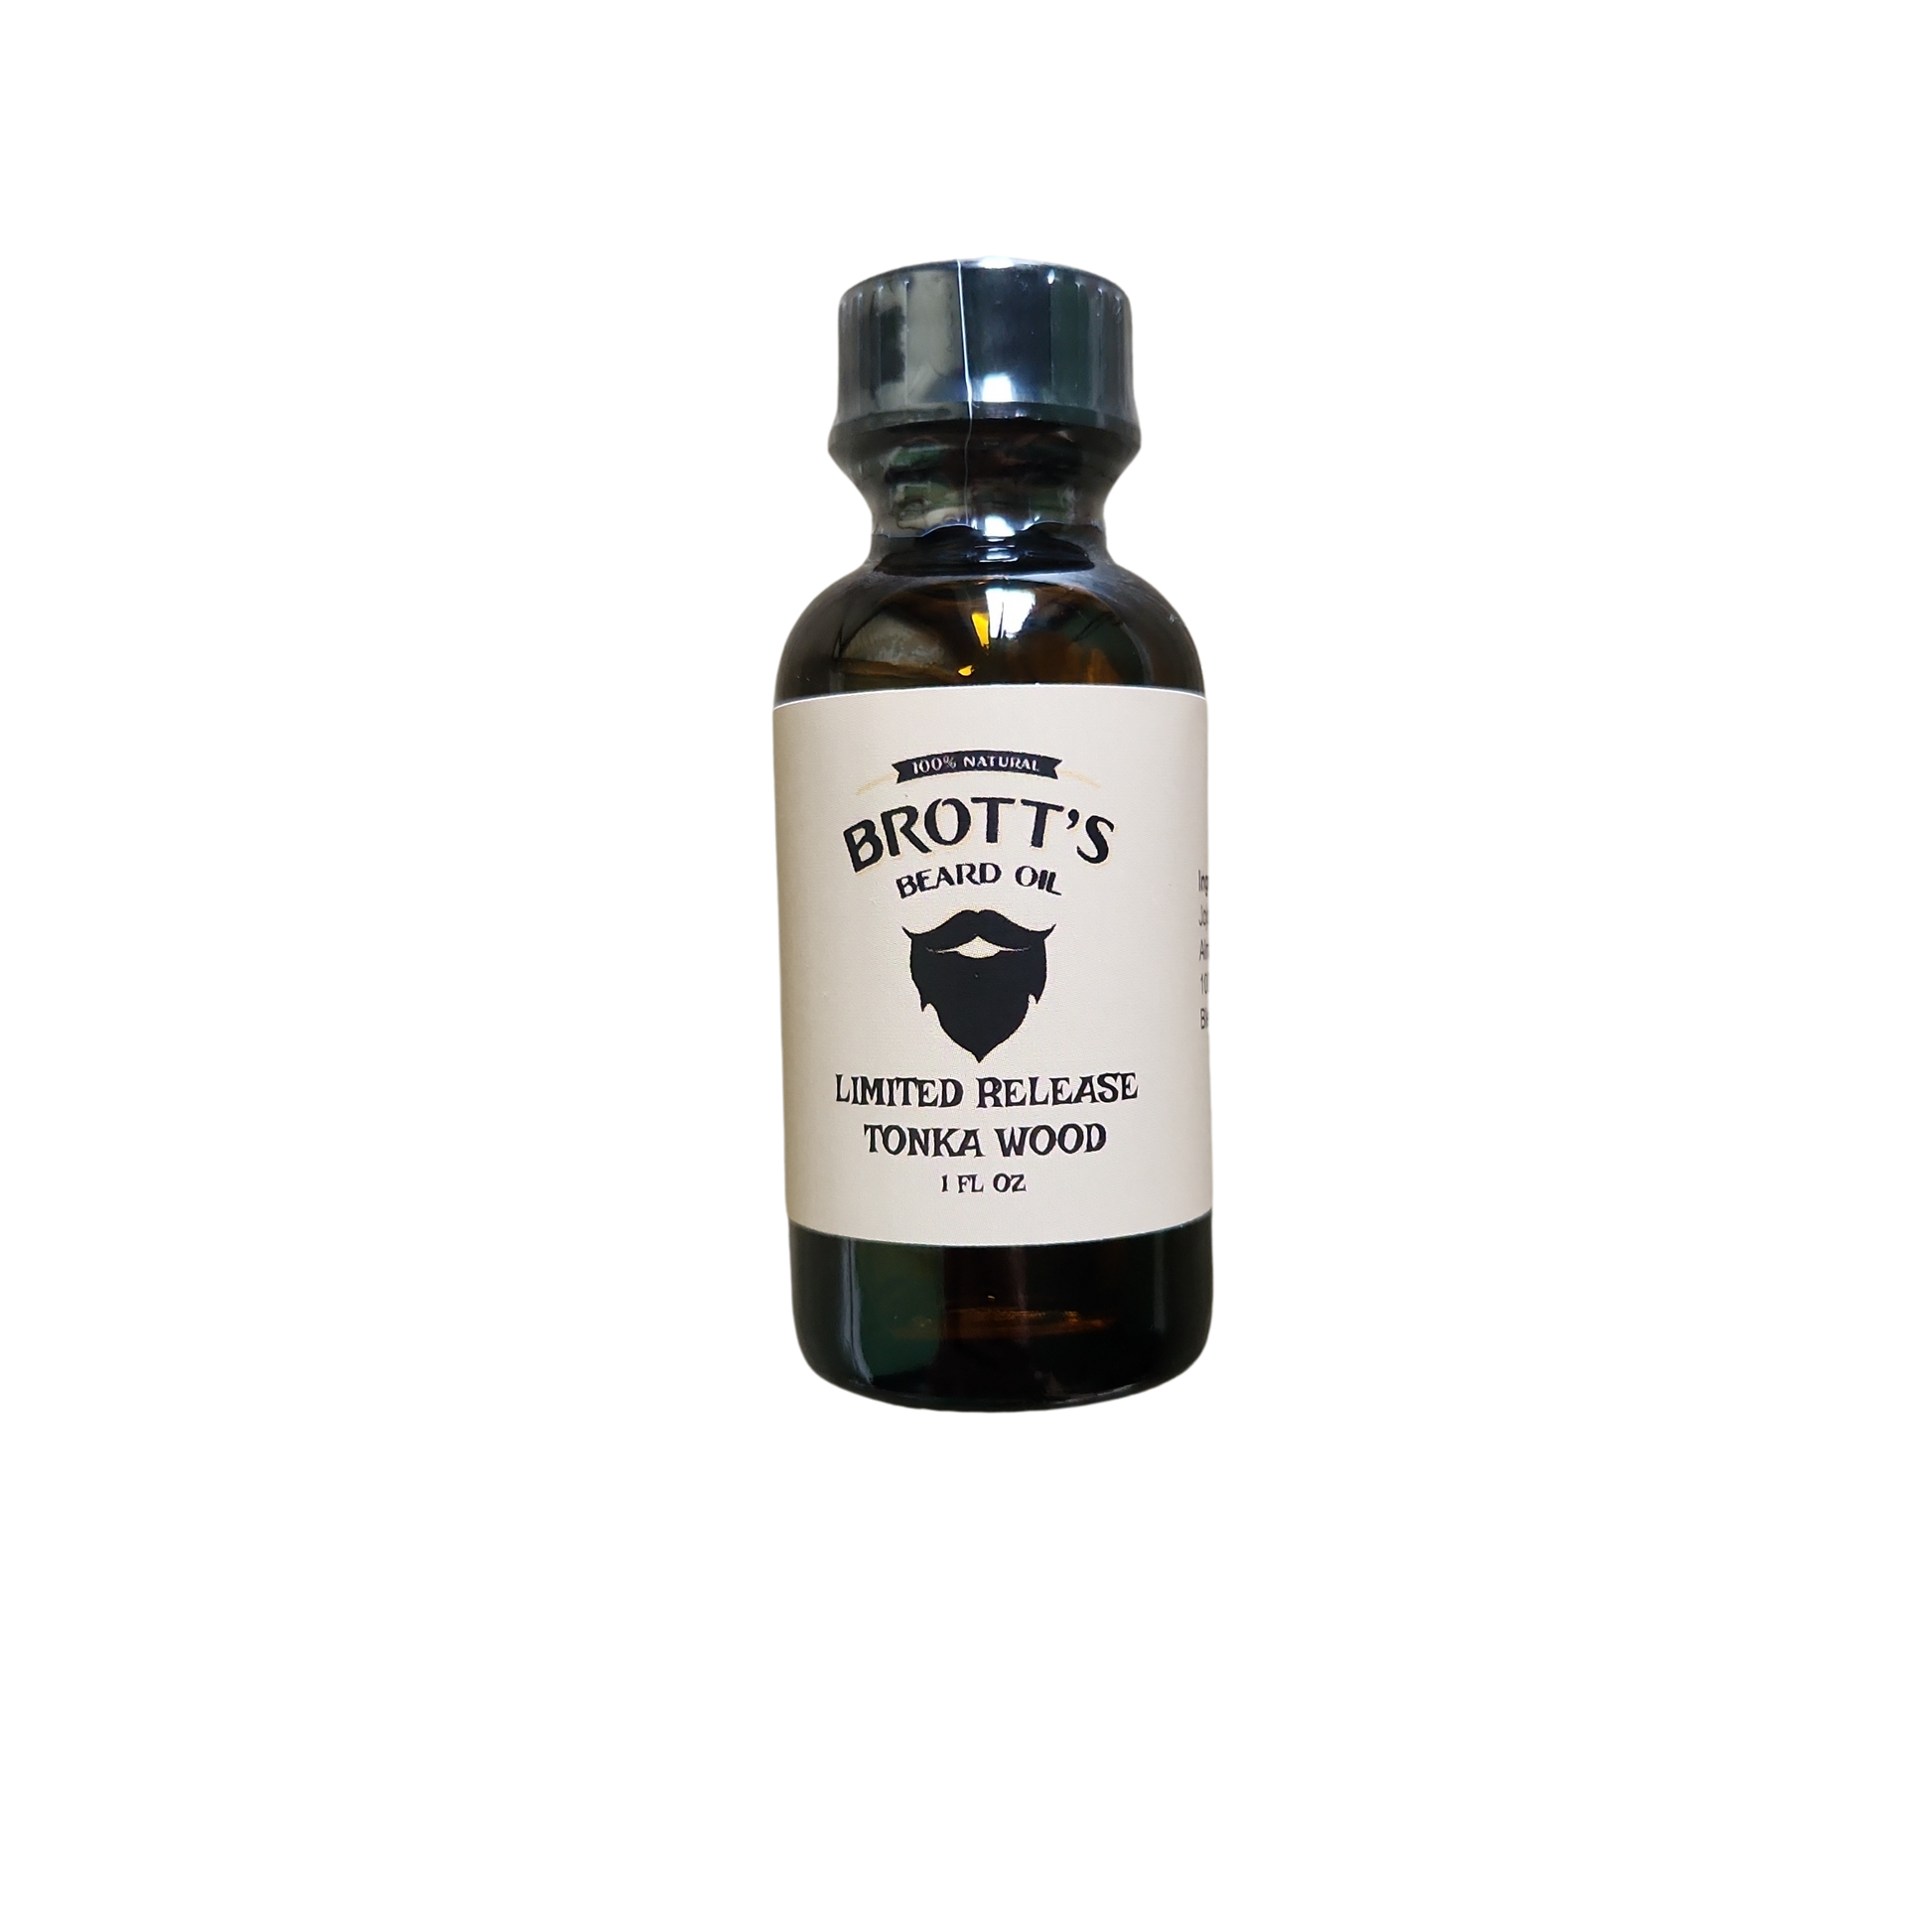 All natural, small batch beard oil with notes of sweet tonka and dry cedarwood.